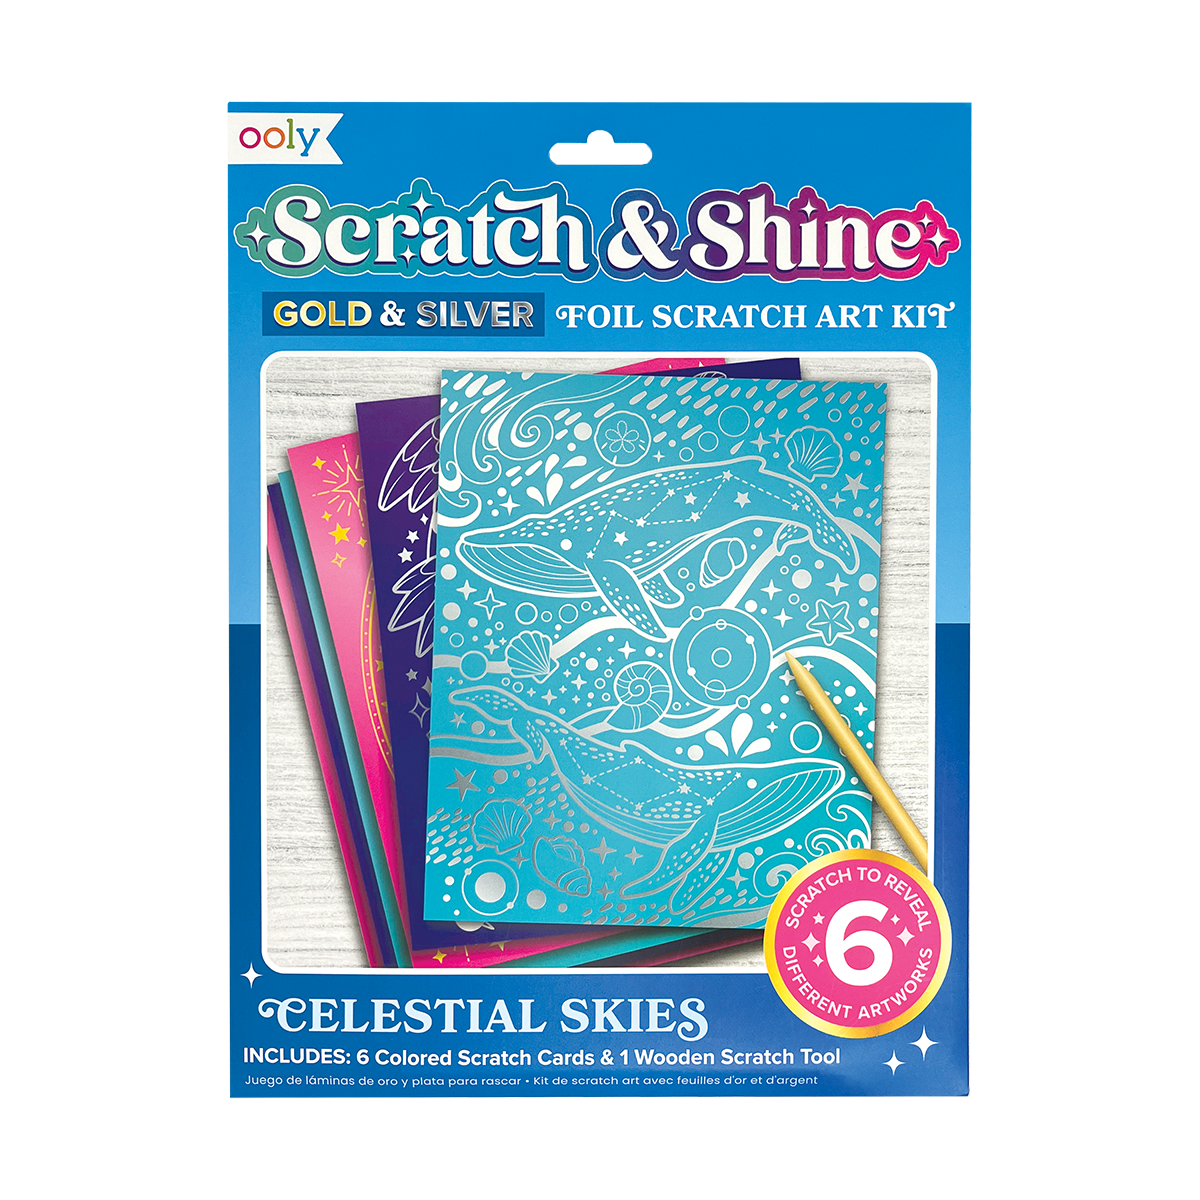 Scratch and Shine Foil Scratch Art Kit - Celestial Skies - OOLY